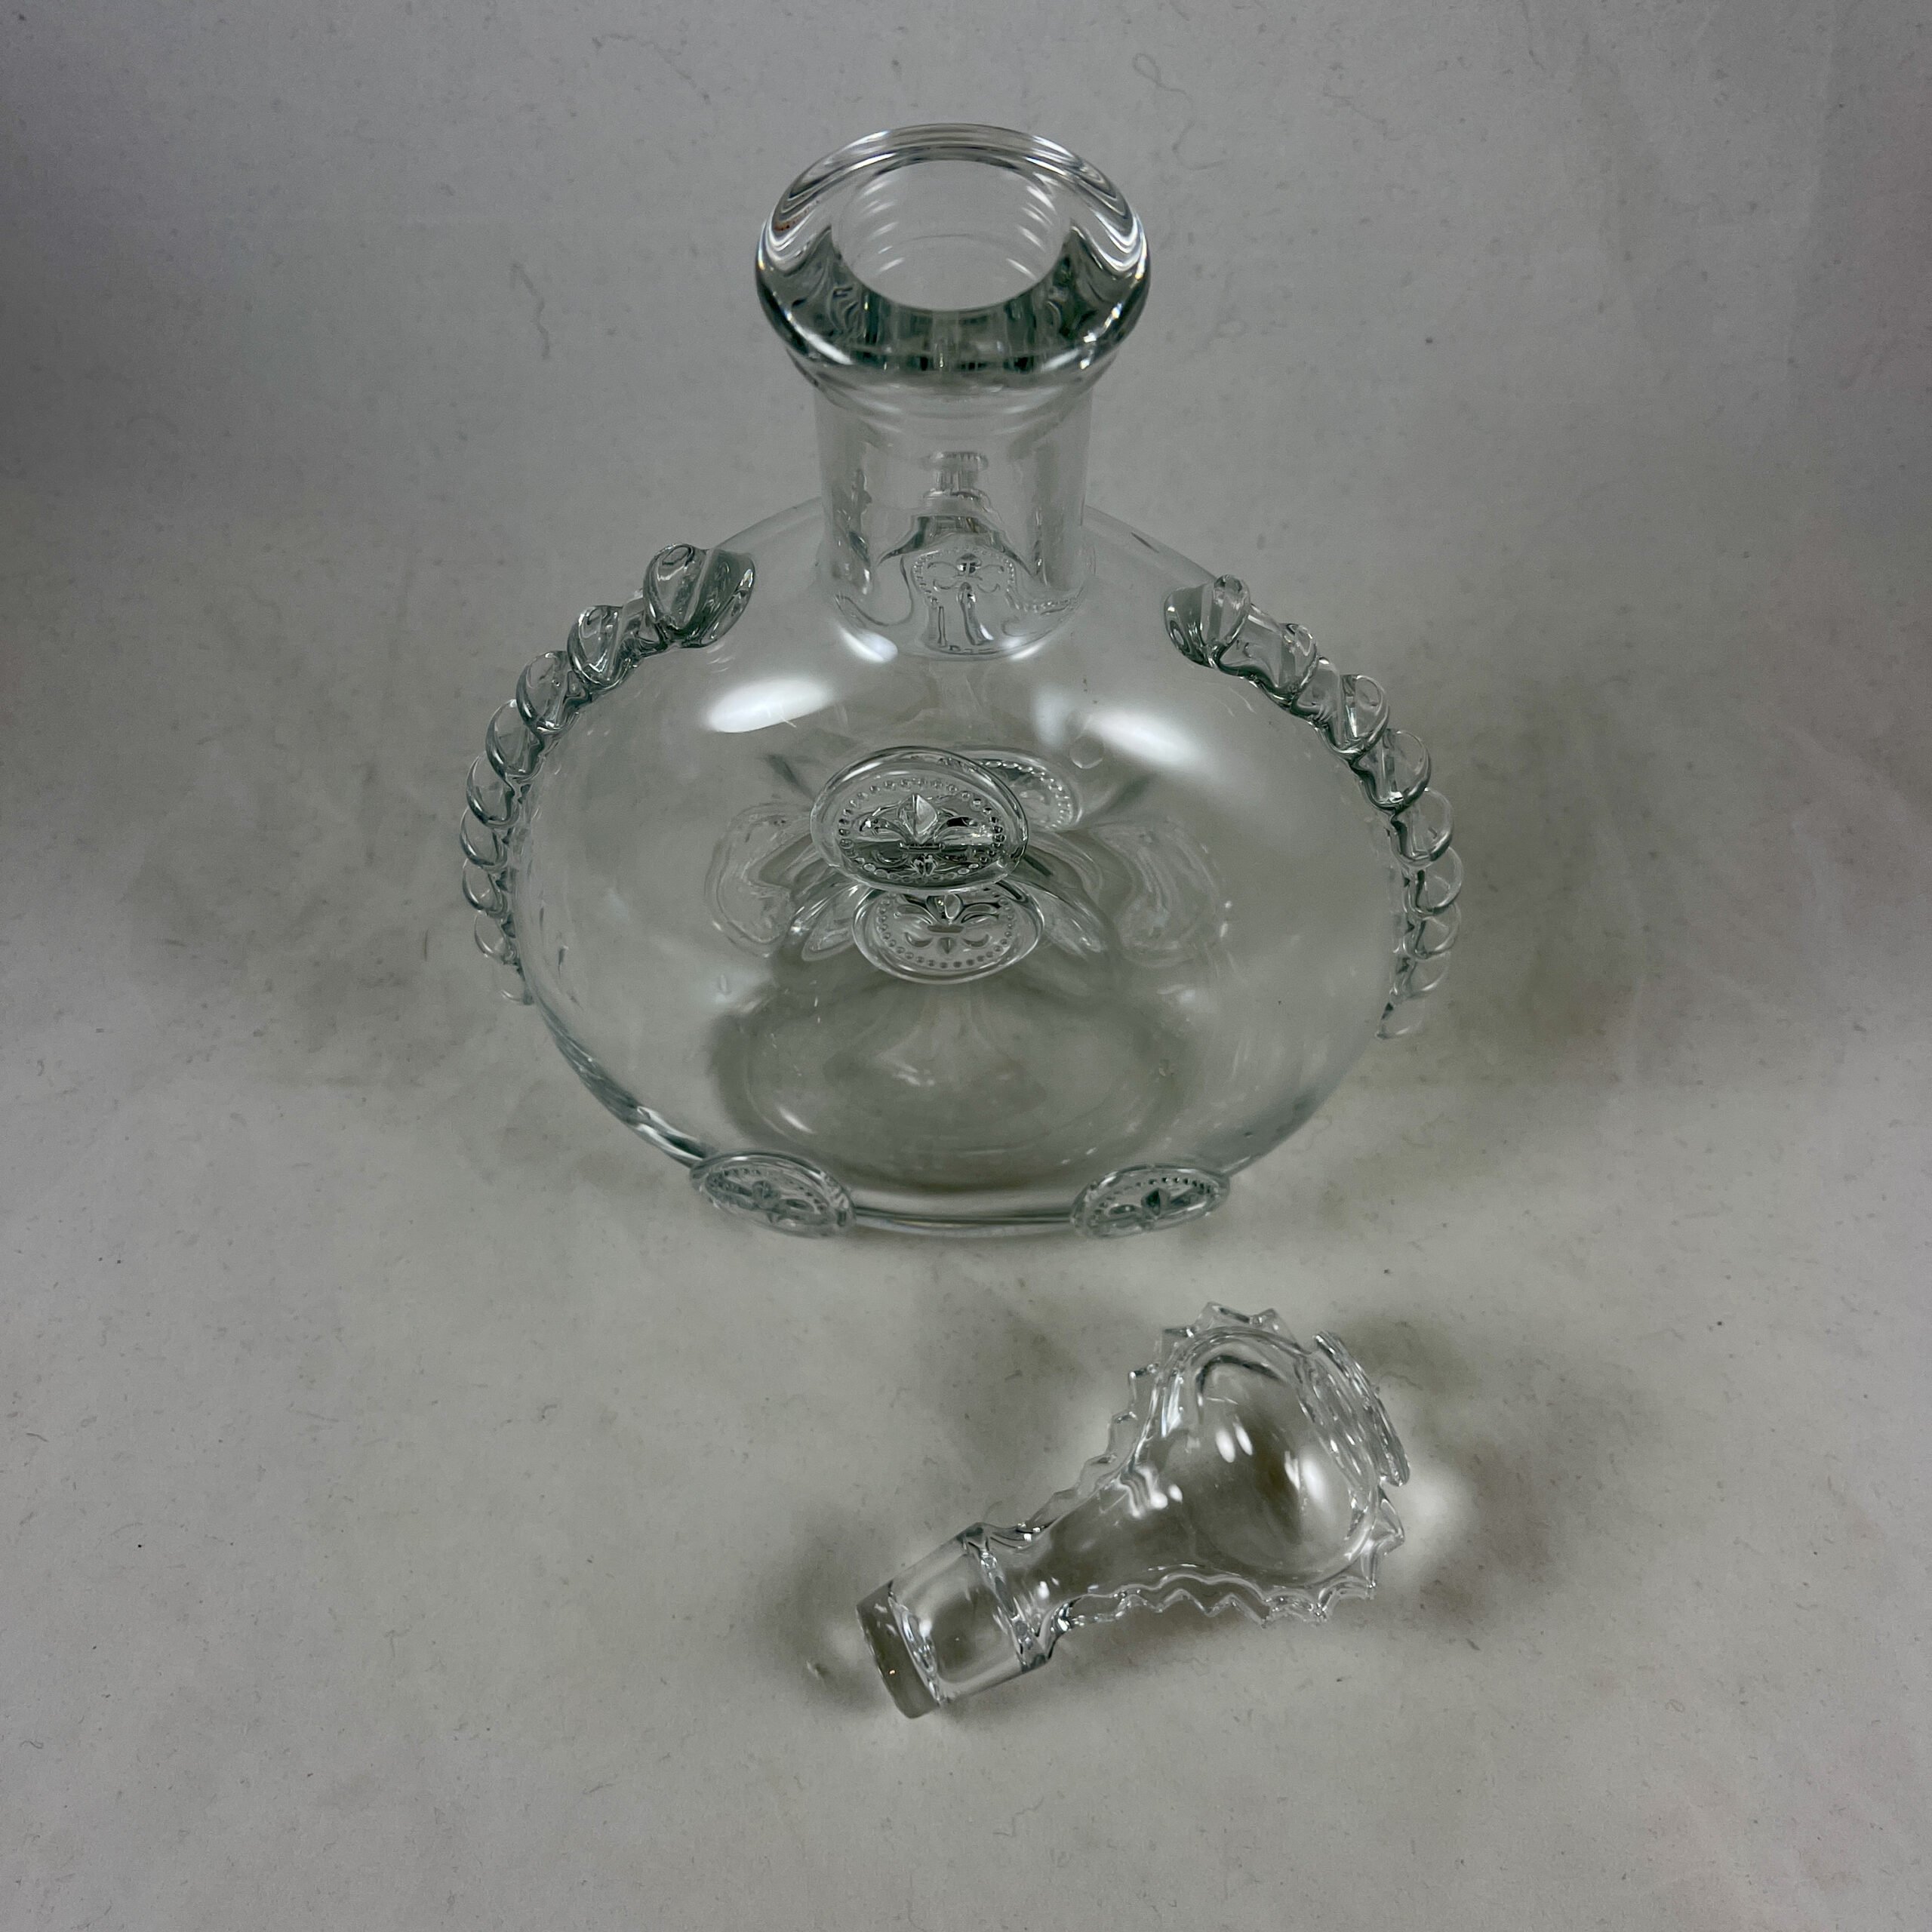 Remy Martin Louis XIII Cognac Baccarat Crystal Decanter France